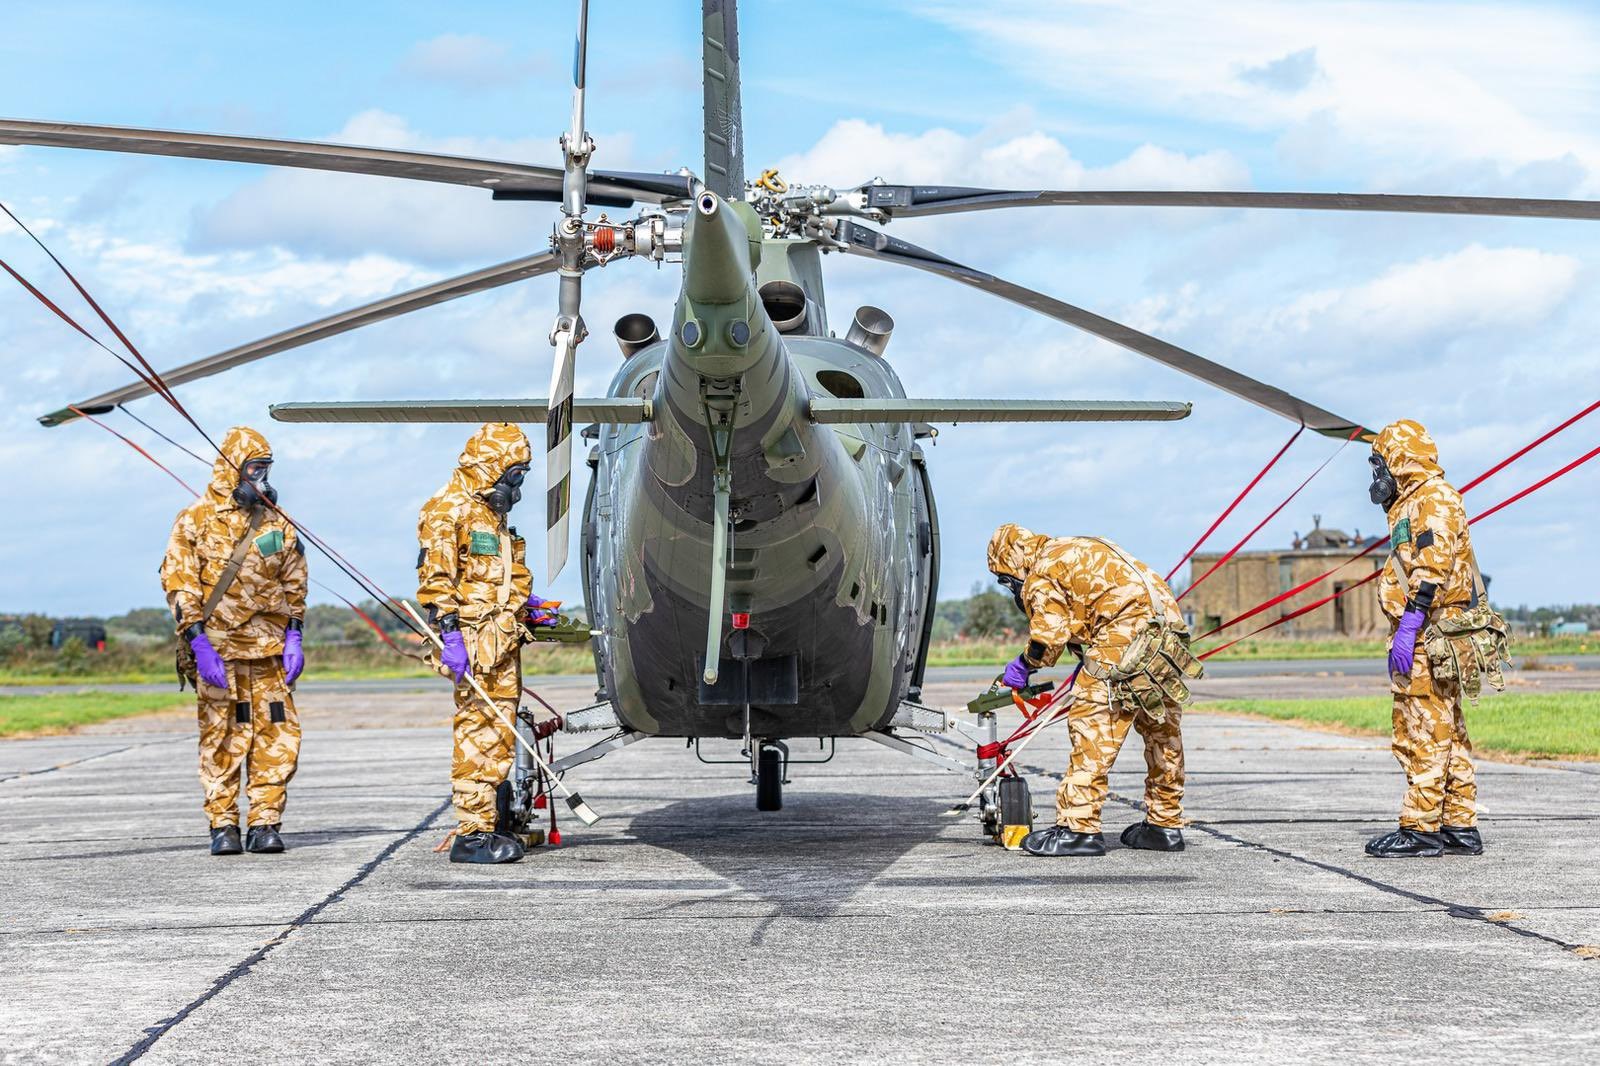 Personnel dressed in CBRN protective kit, clean down a helicopter